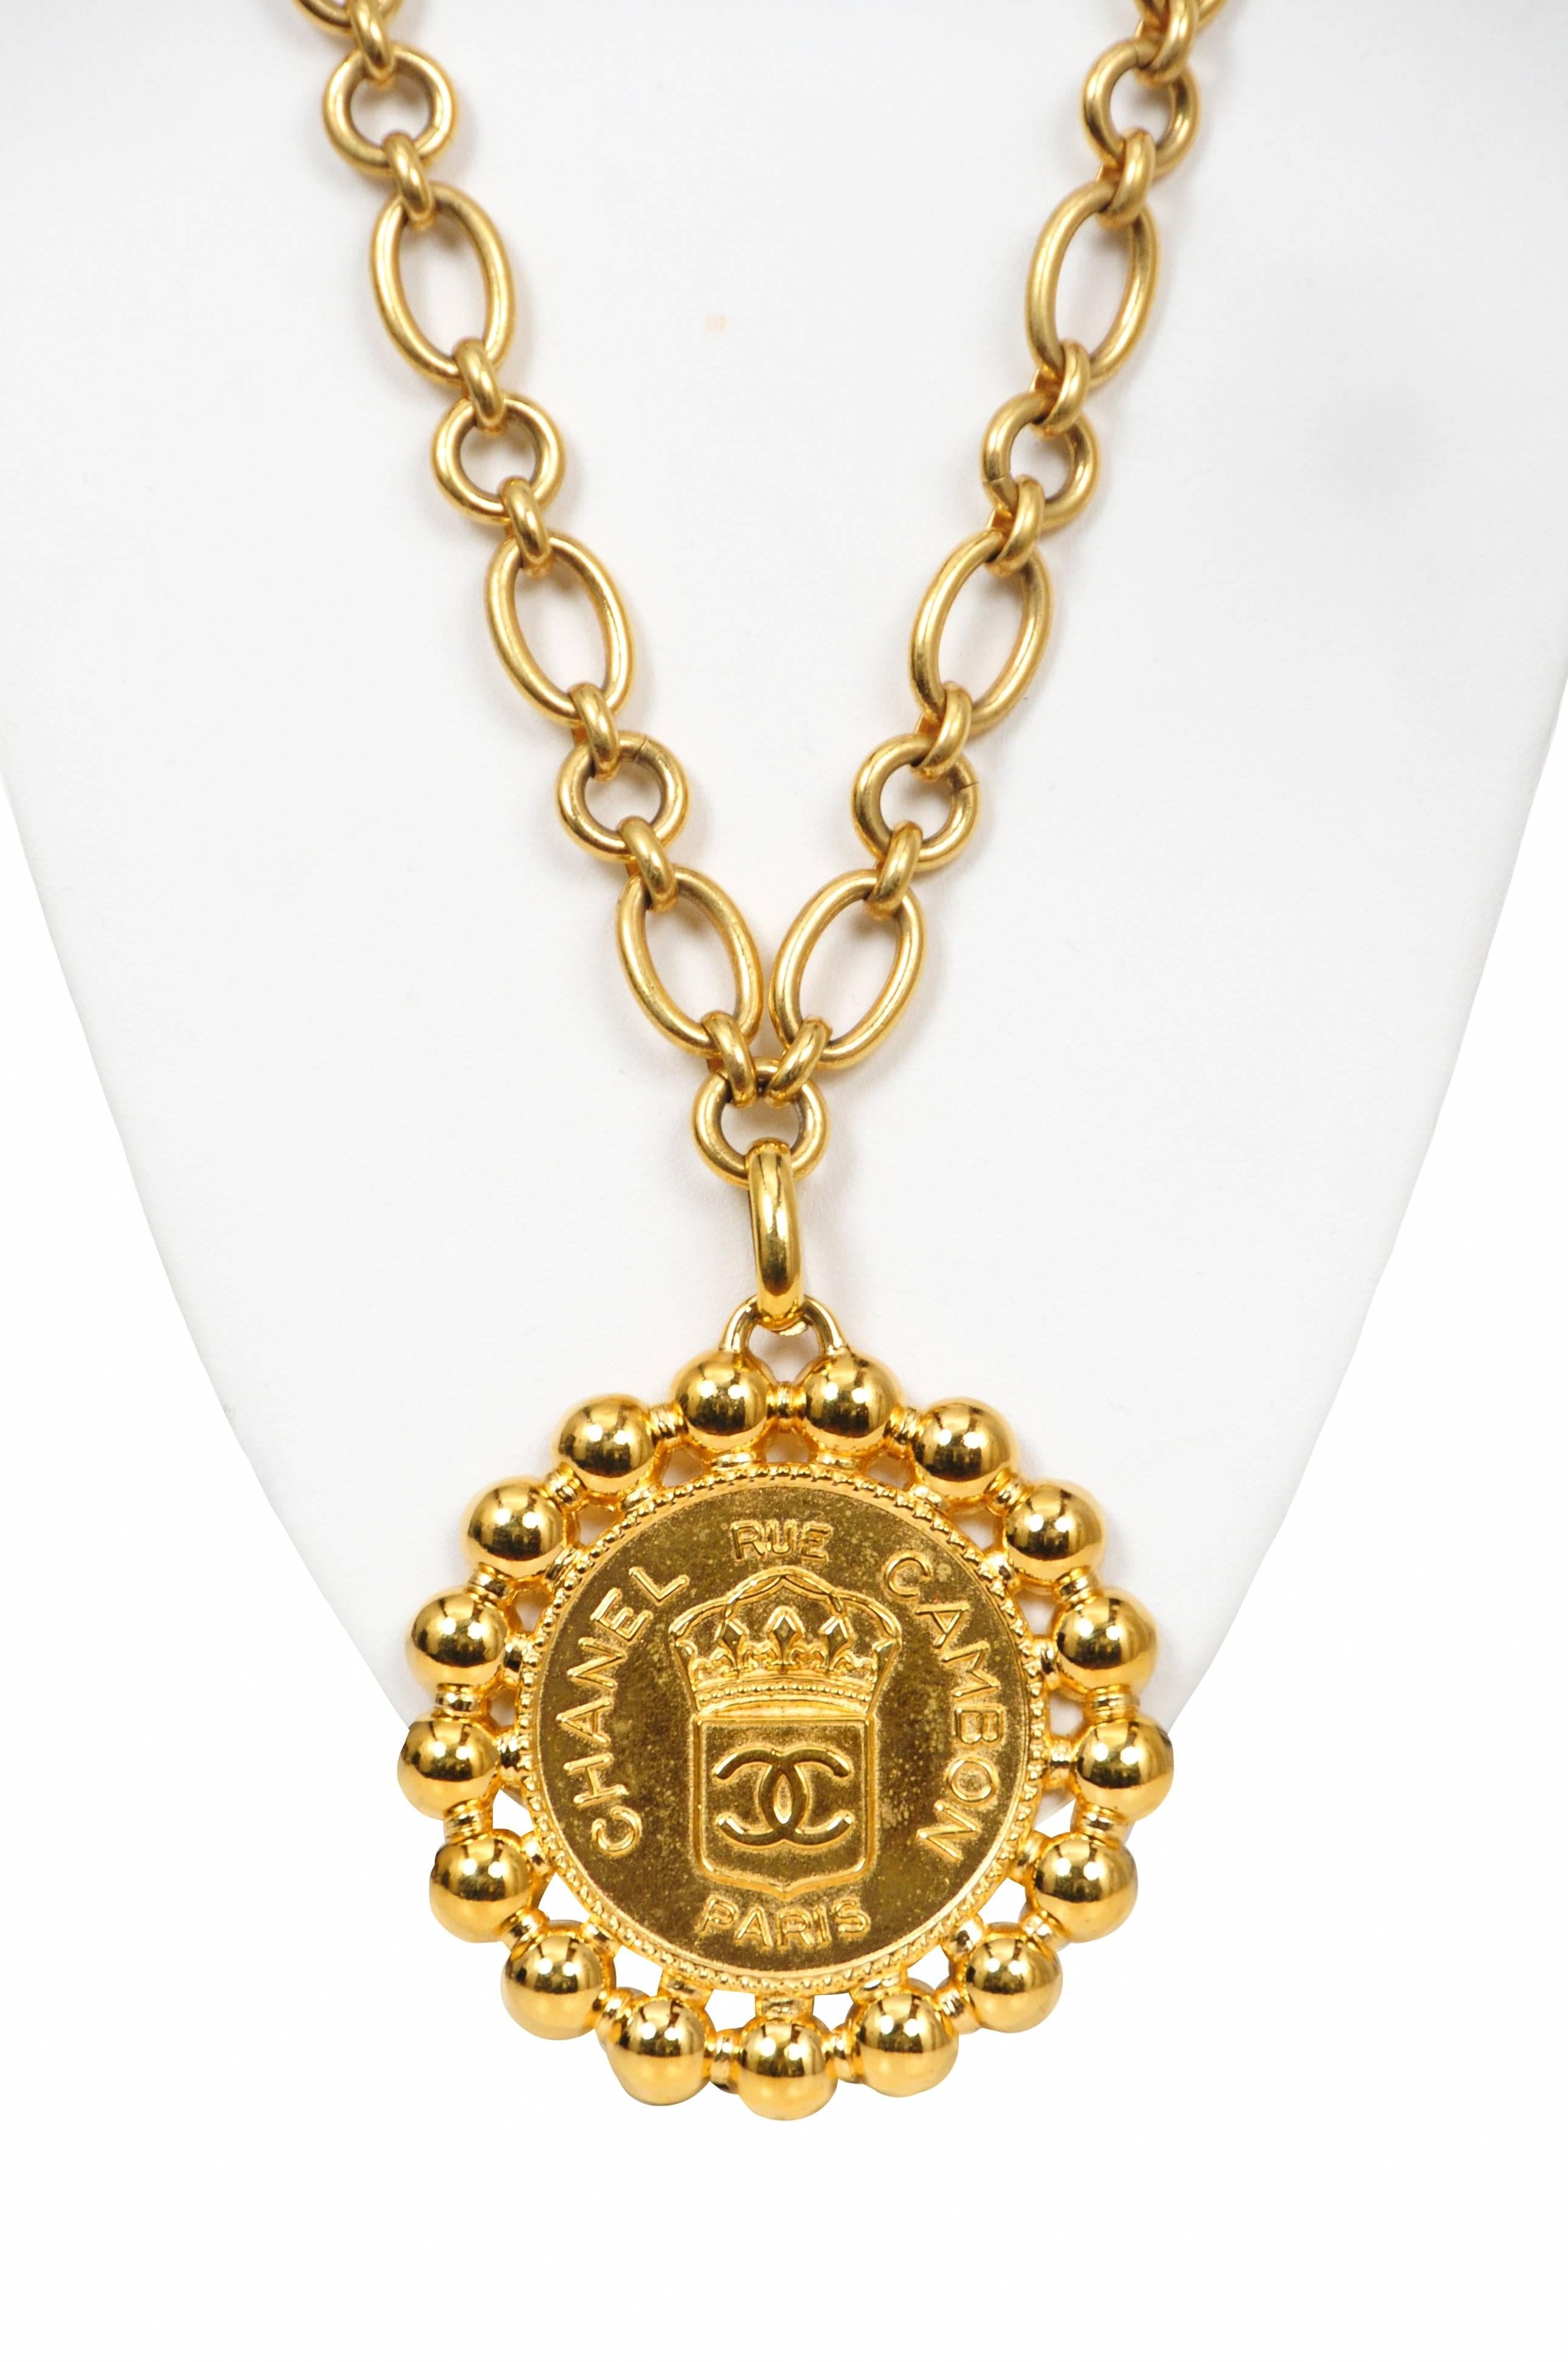 Vintage Chanel gold tone chain necklace featuring a medallion stamped with a Chanel royal seal. 